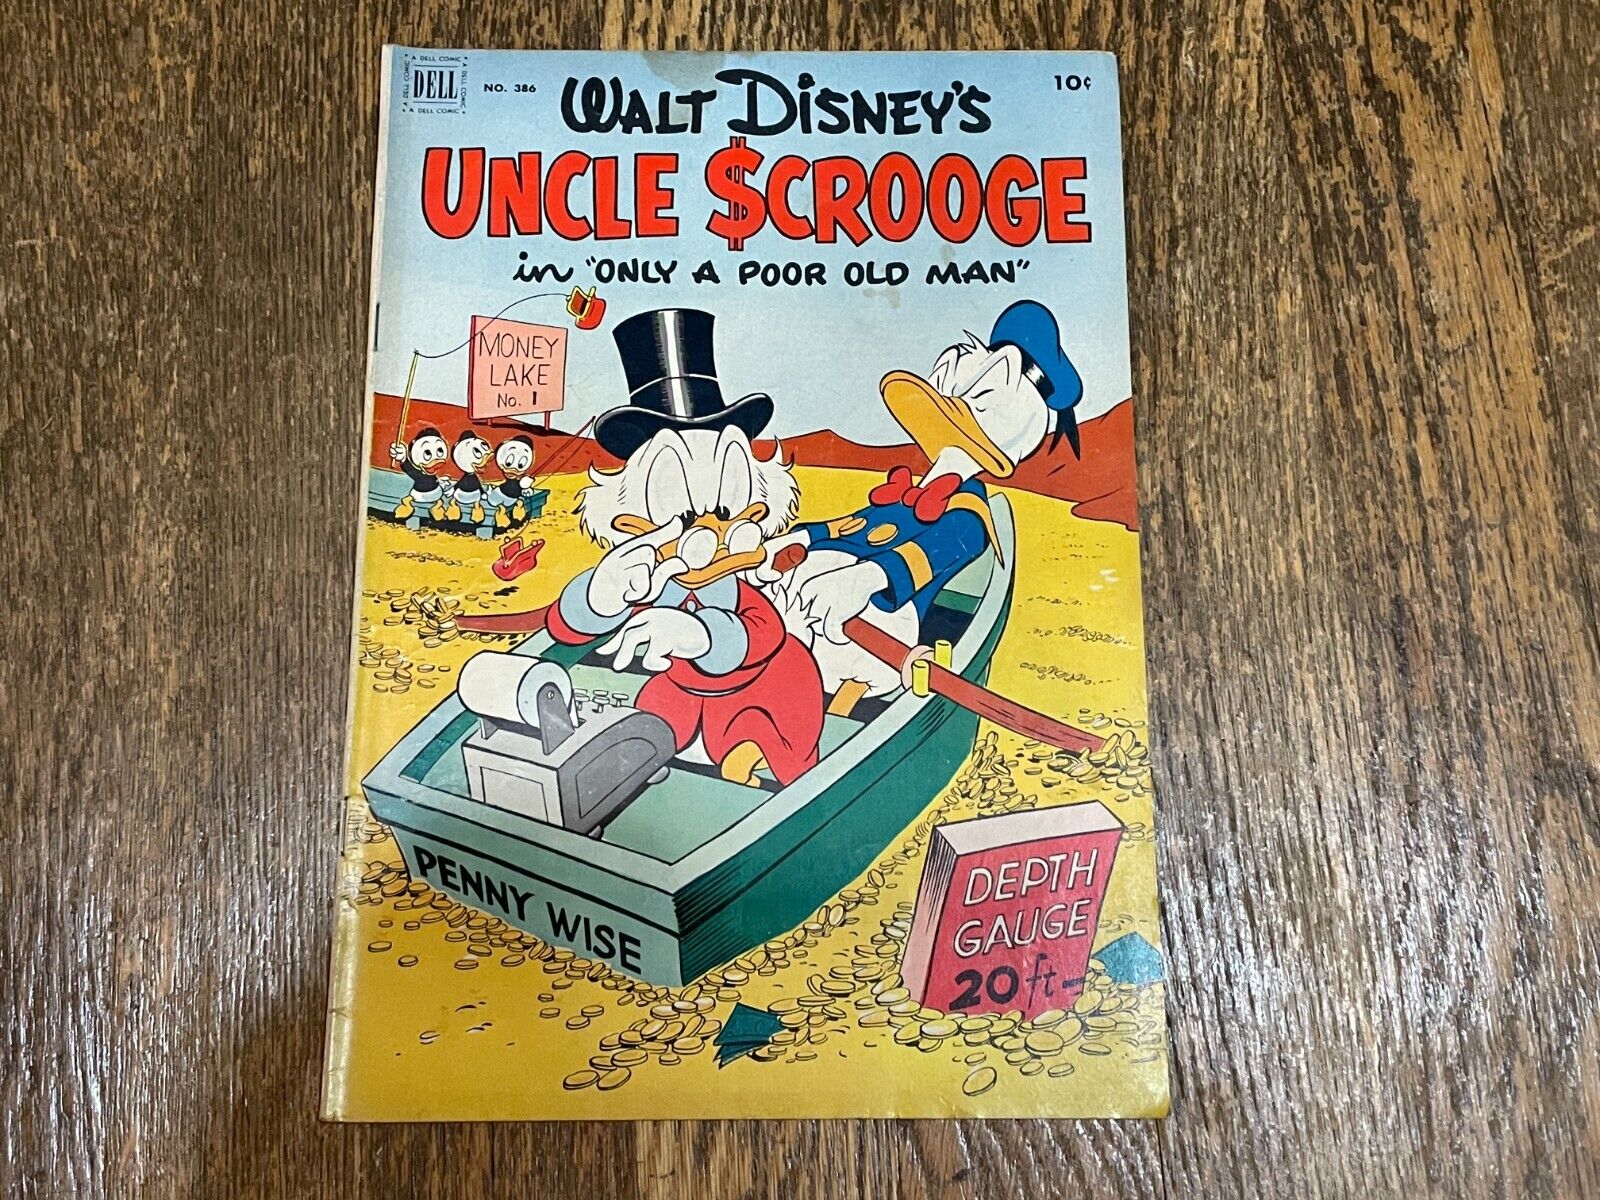 FOUR COLOR # 386 Uncle Scrooge # 1 Key DELL 1952 CARL BARKS Golden Age